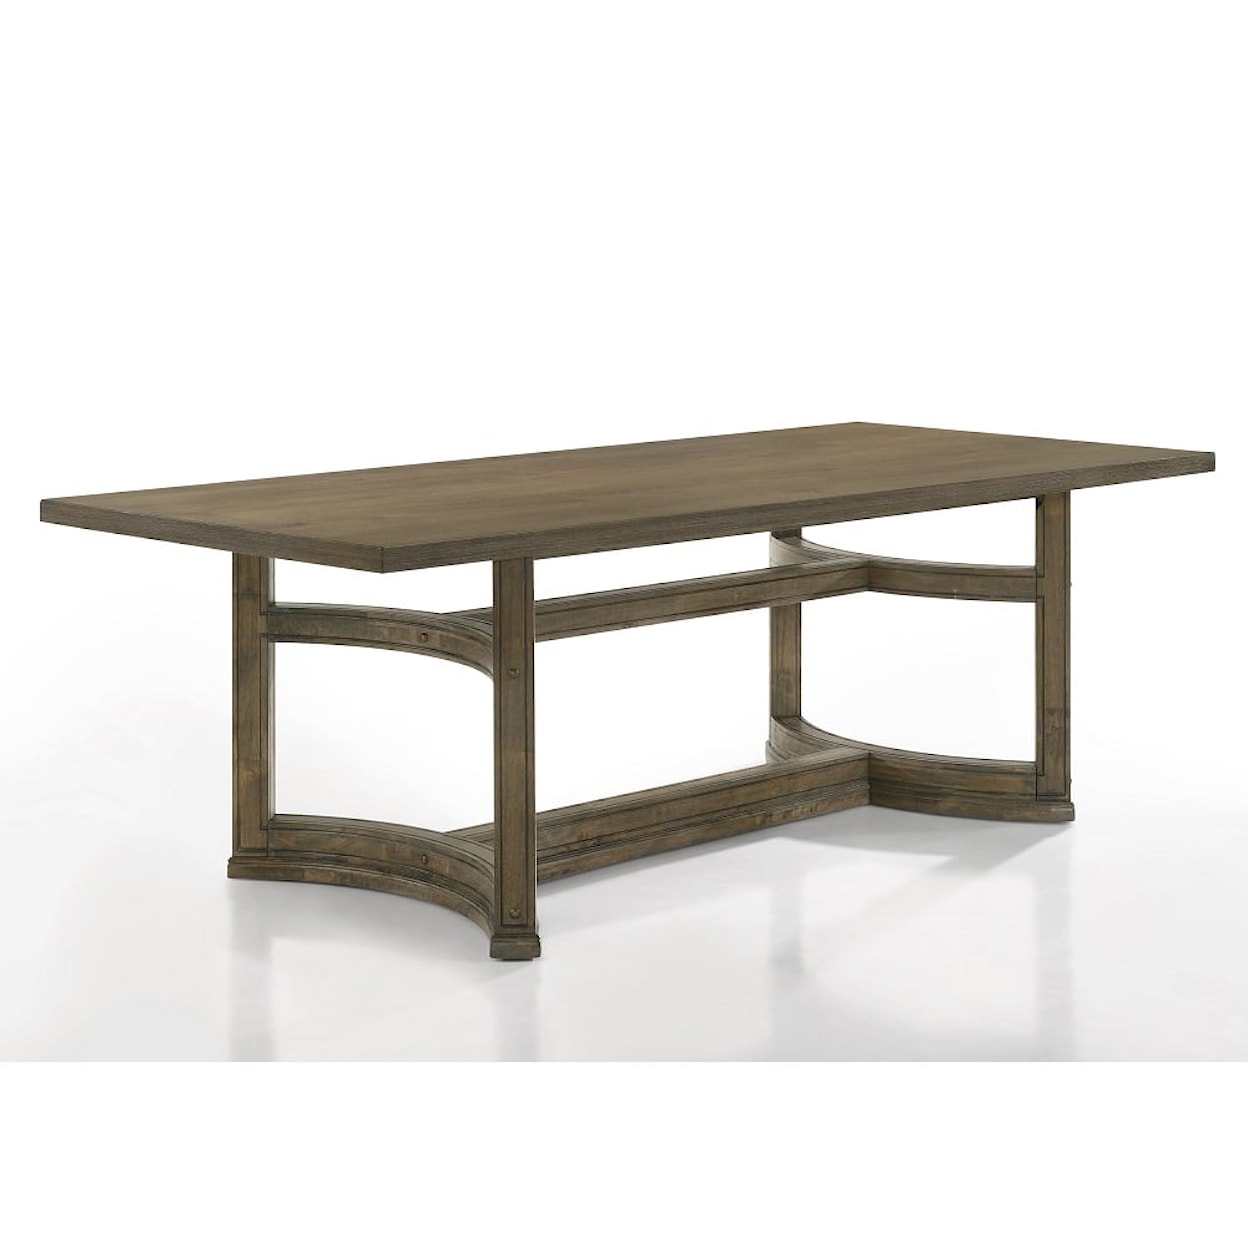 Acme Furniture Parfield Dining Table - Base